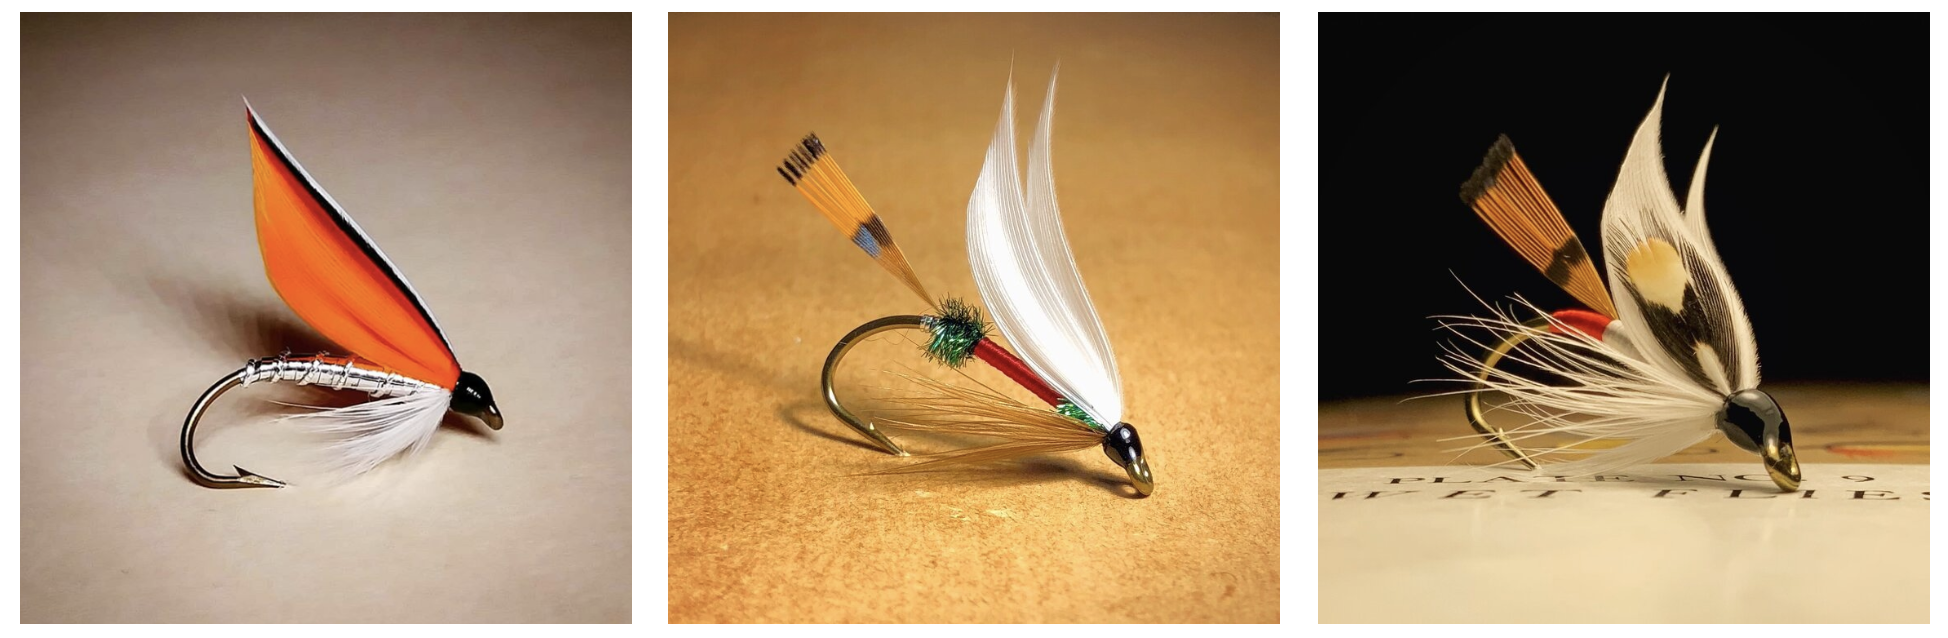 The 17 Best Flies for Brook Trout (And How to Fish Them) - Guide Recommended